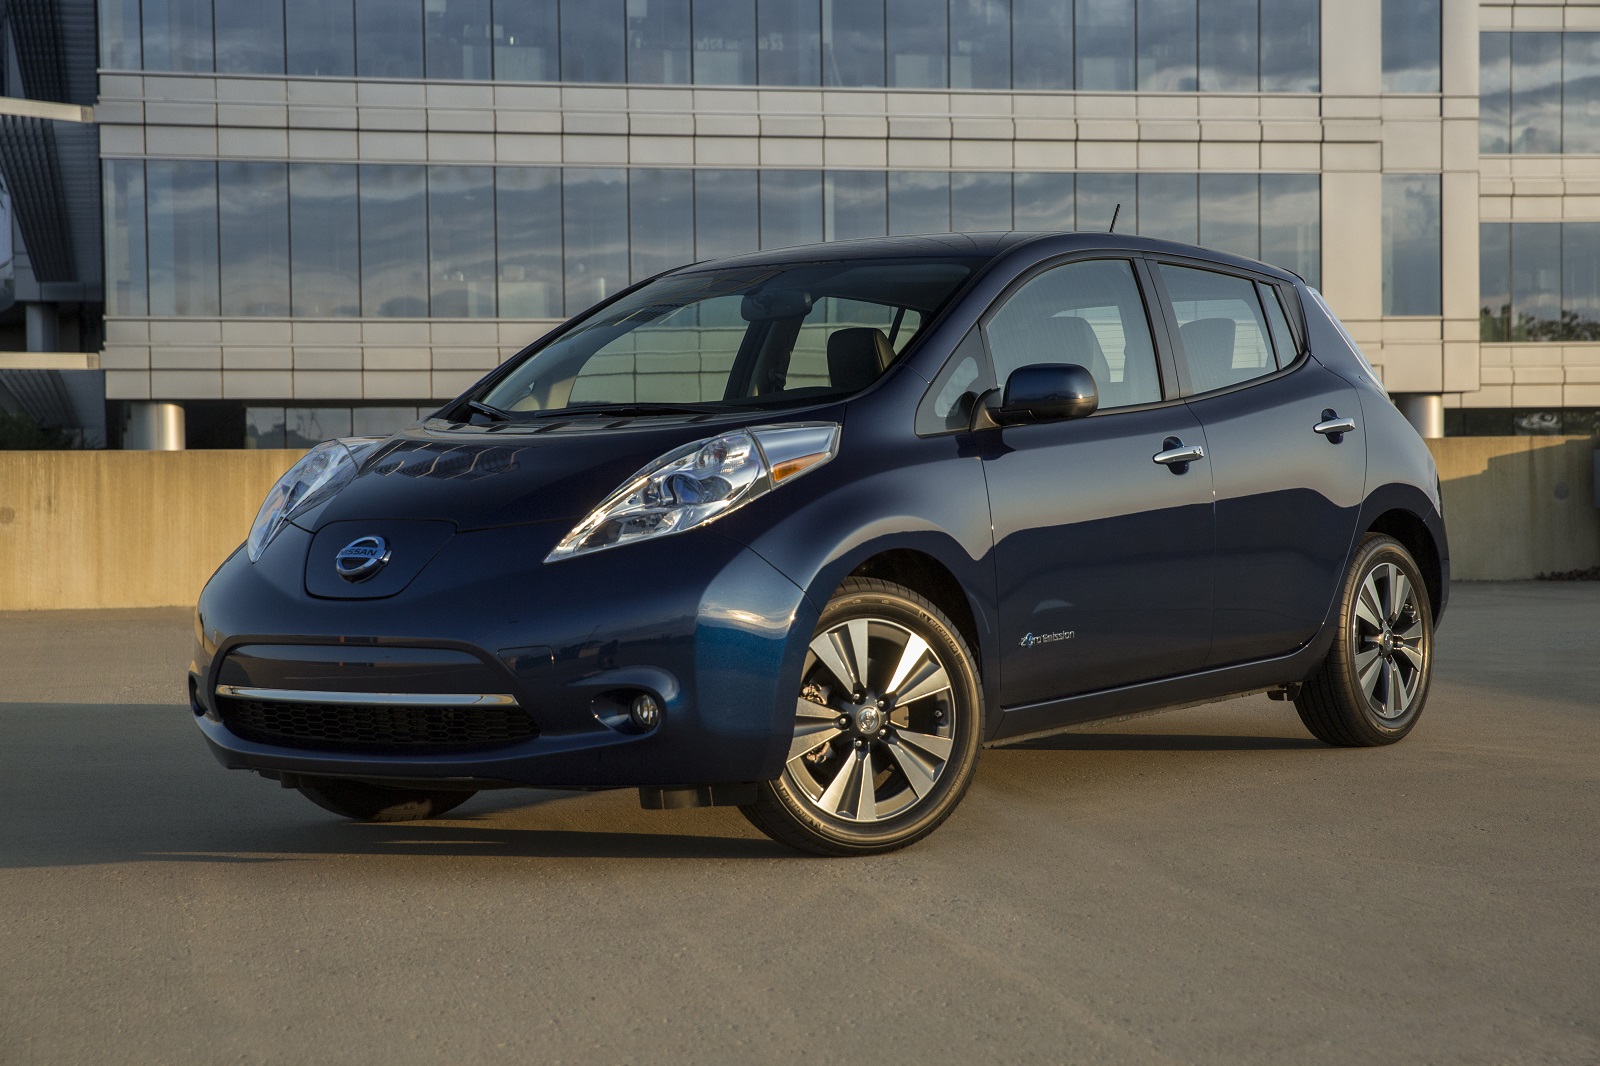 2016 Nissan Leaf: How Does It Compare To 2012 Model On Price ...